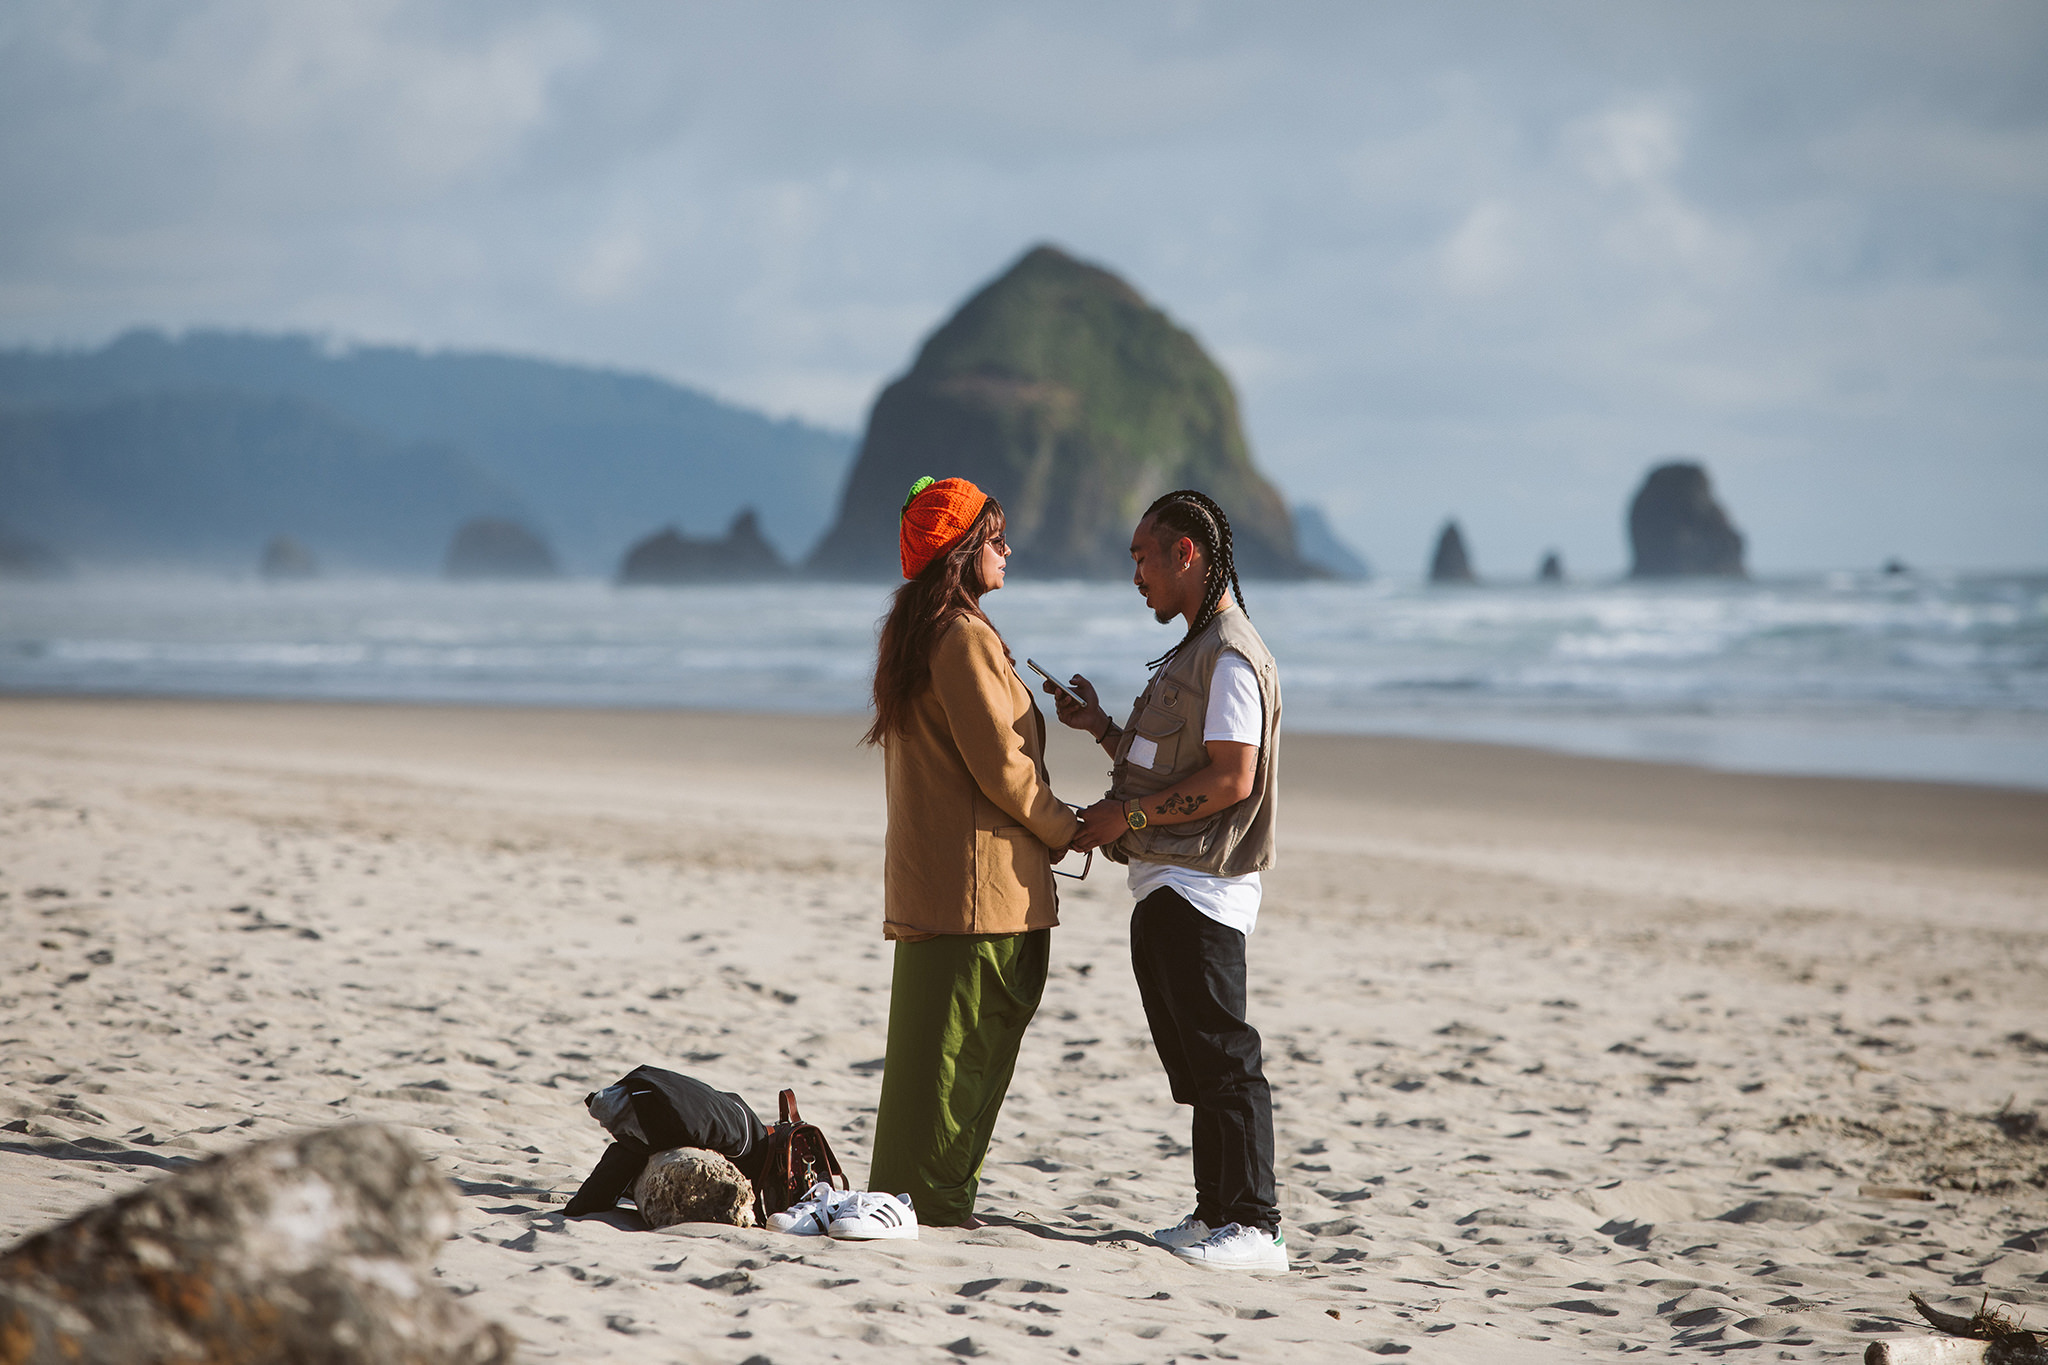 A man proposing to his girlfriend on the Oregon coast